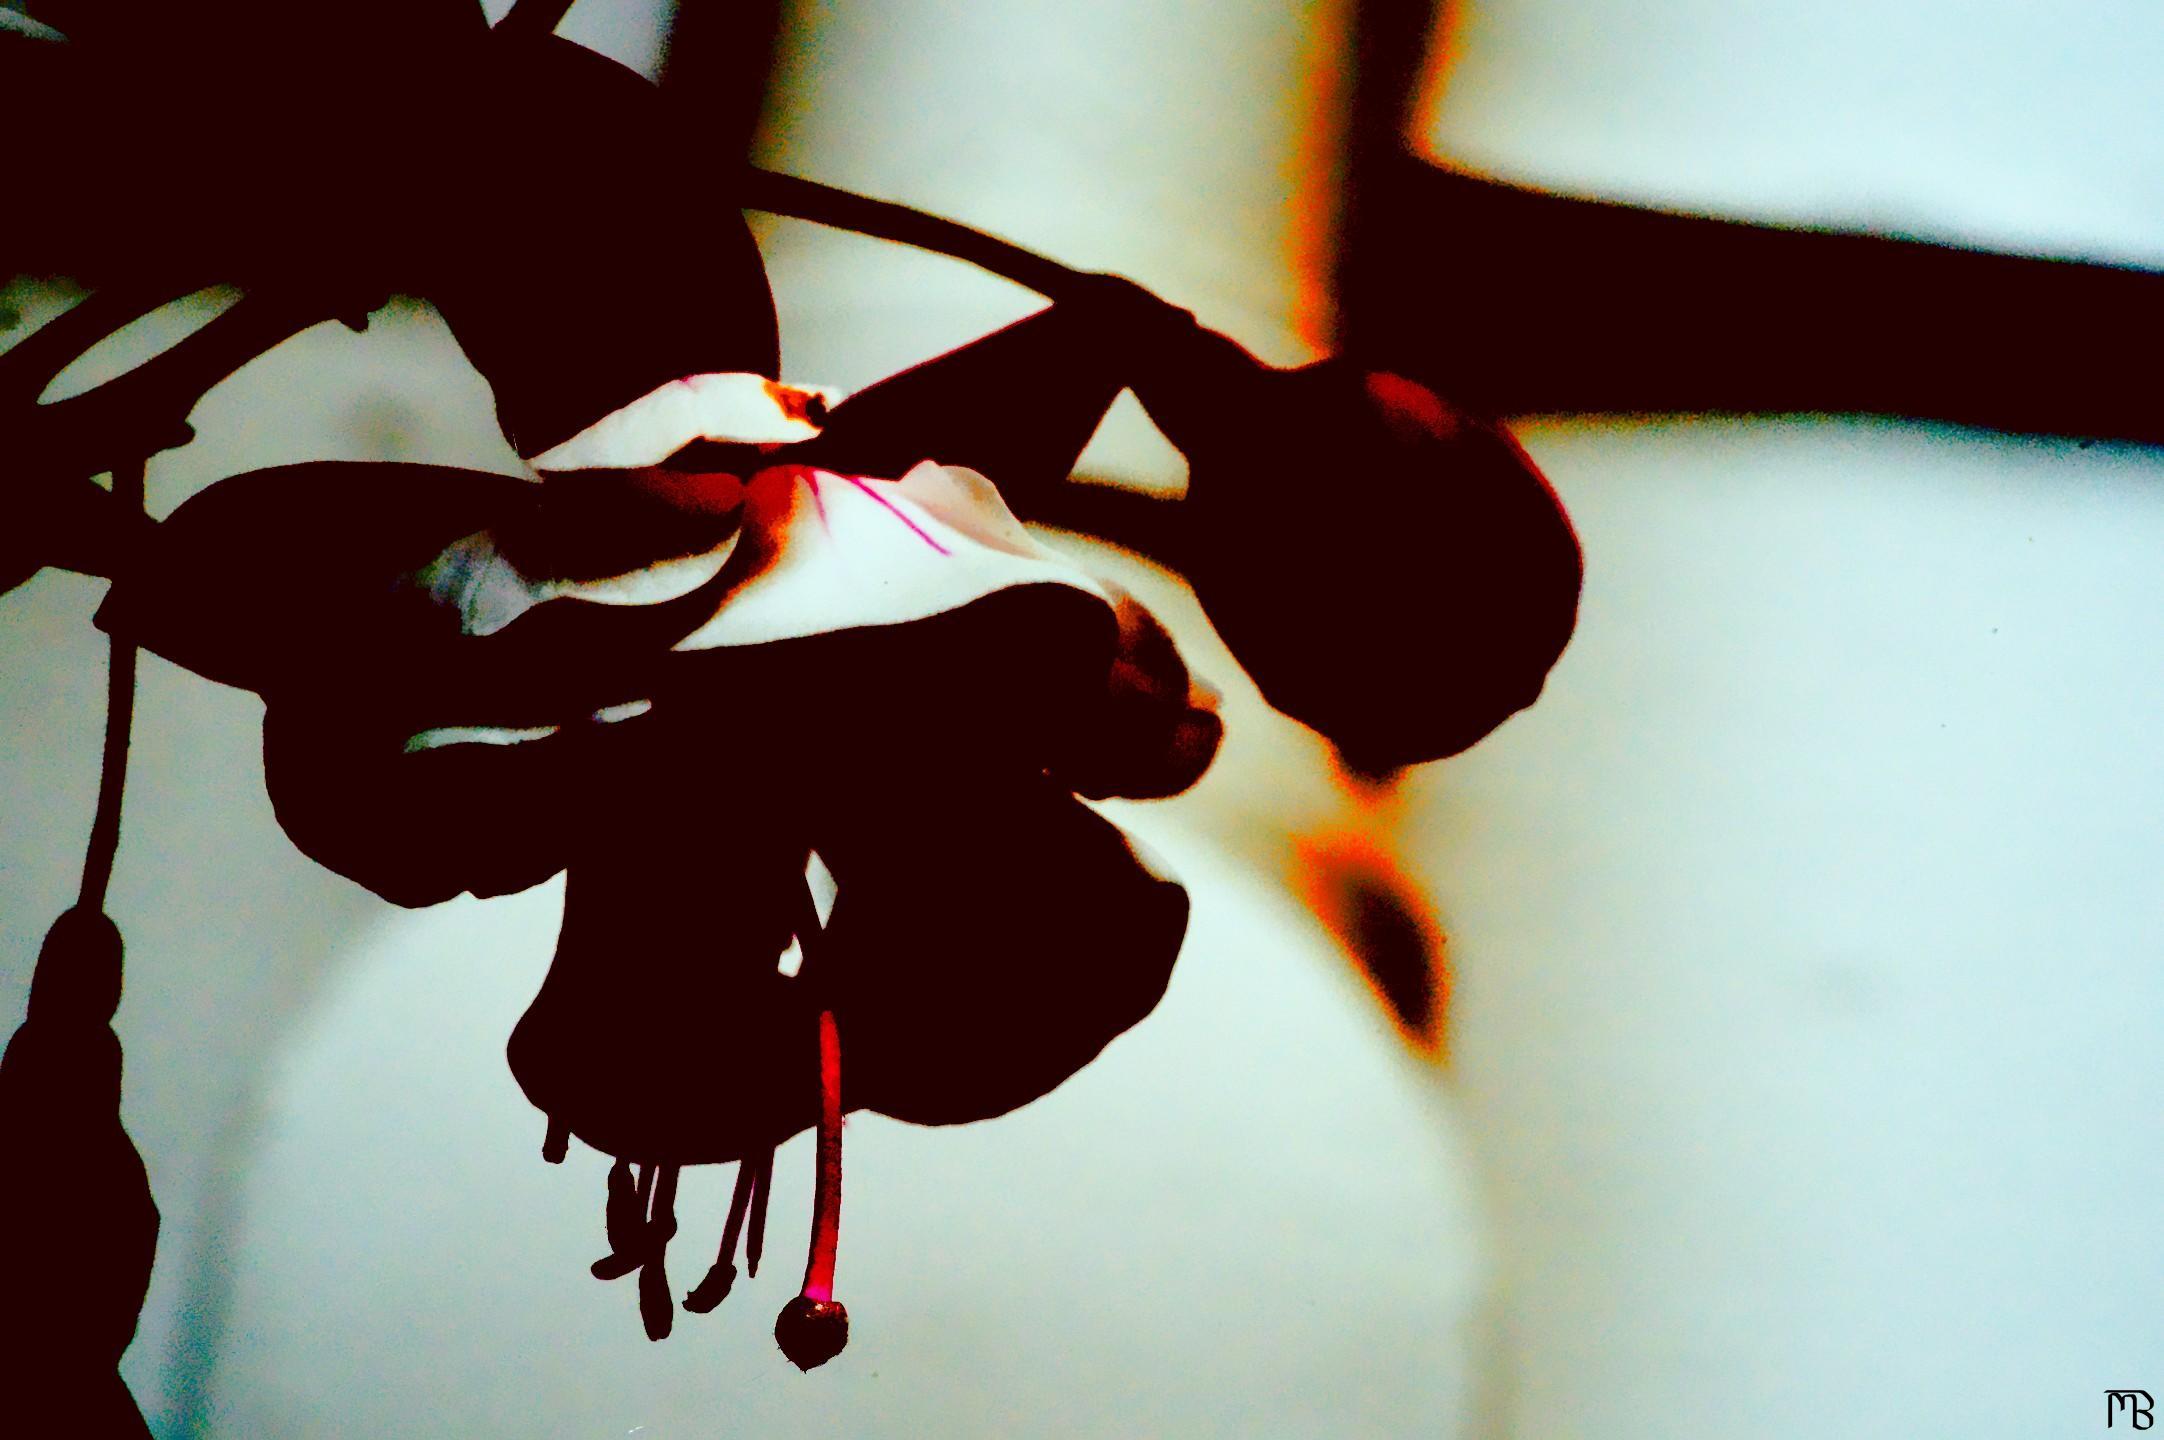 Arty black and red flower drooping